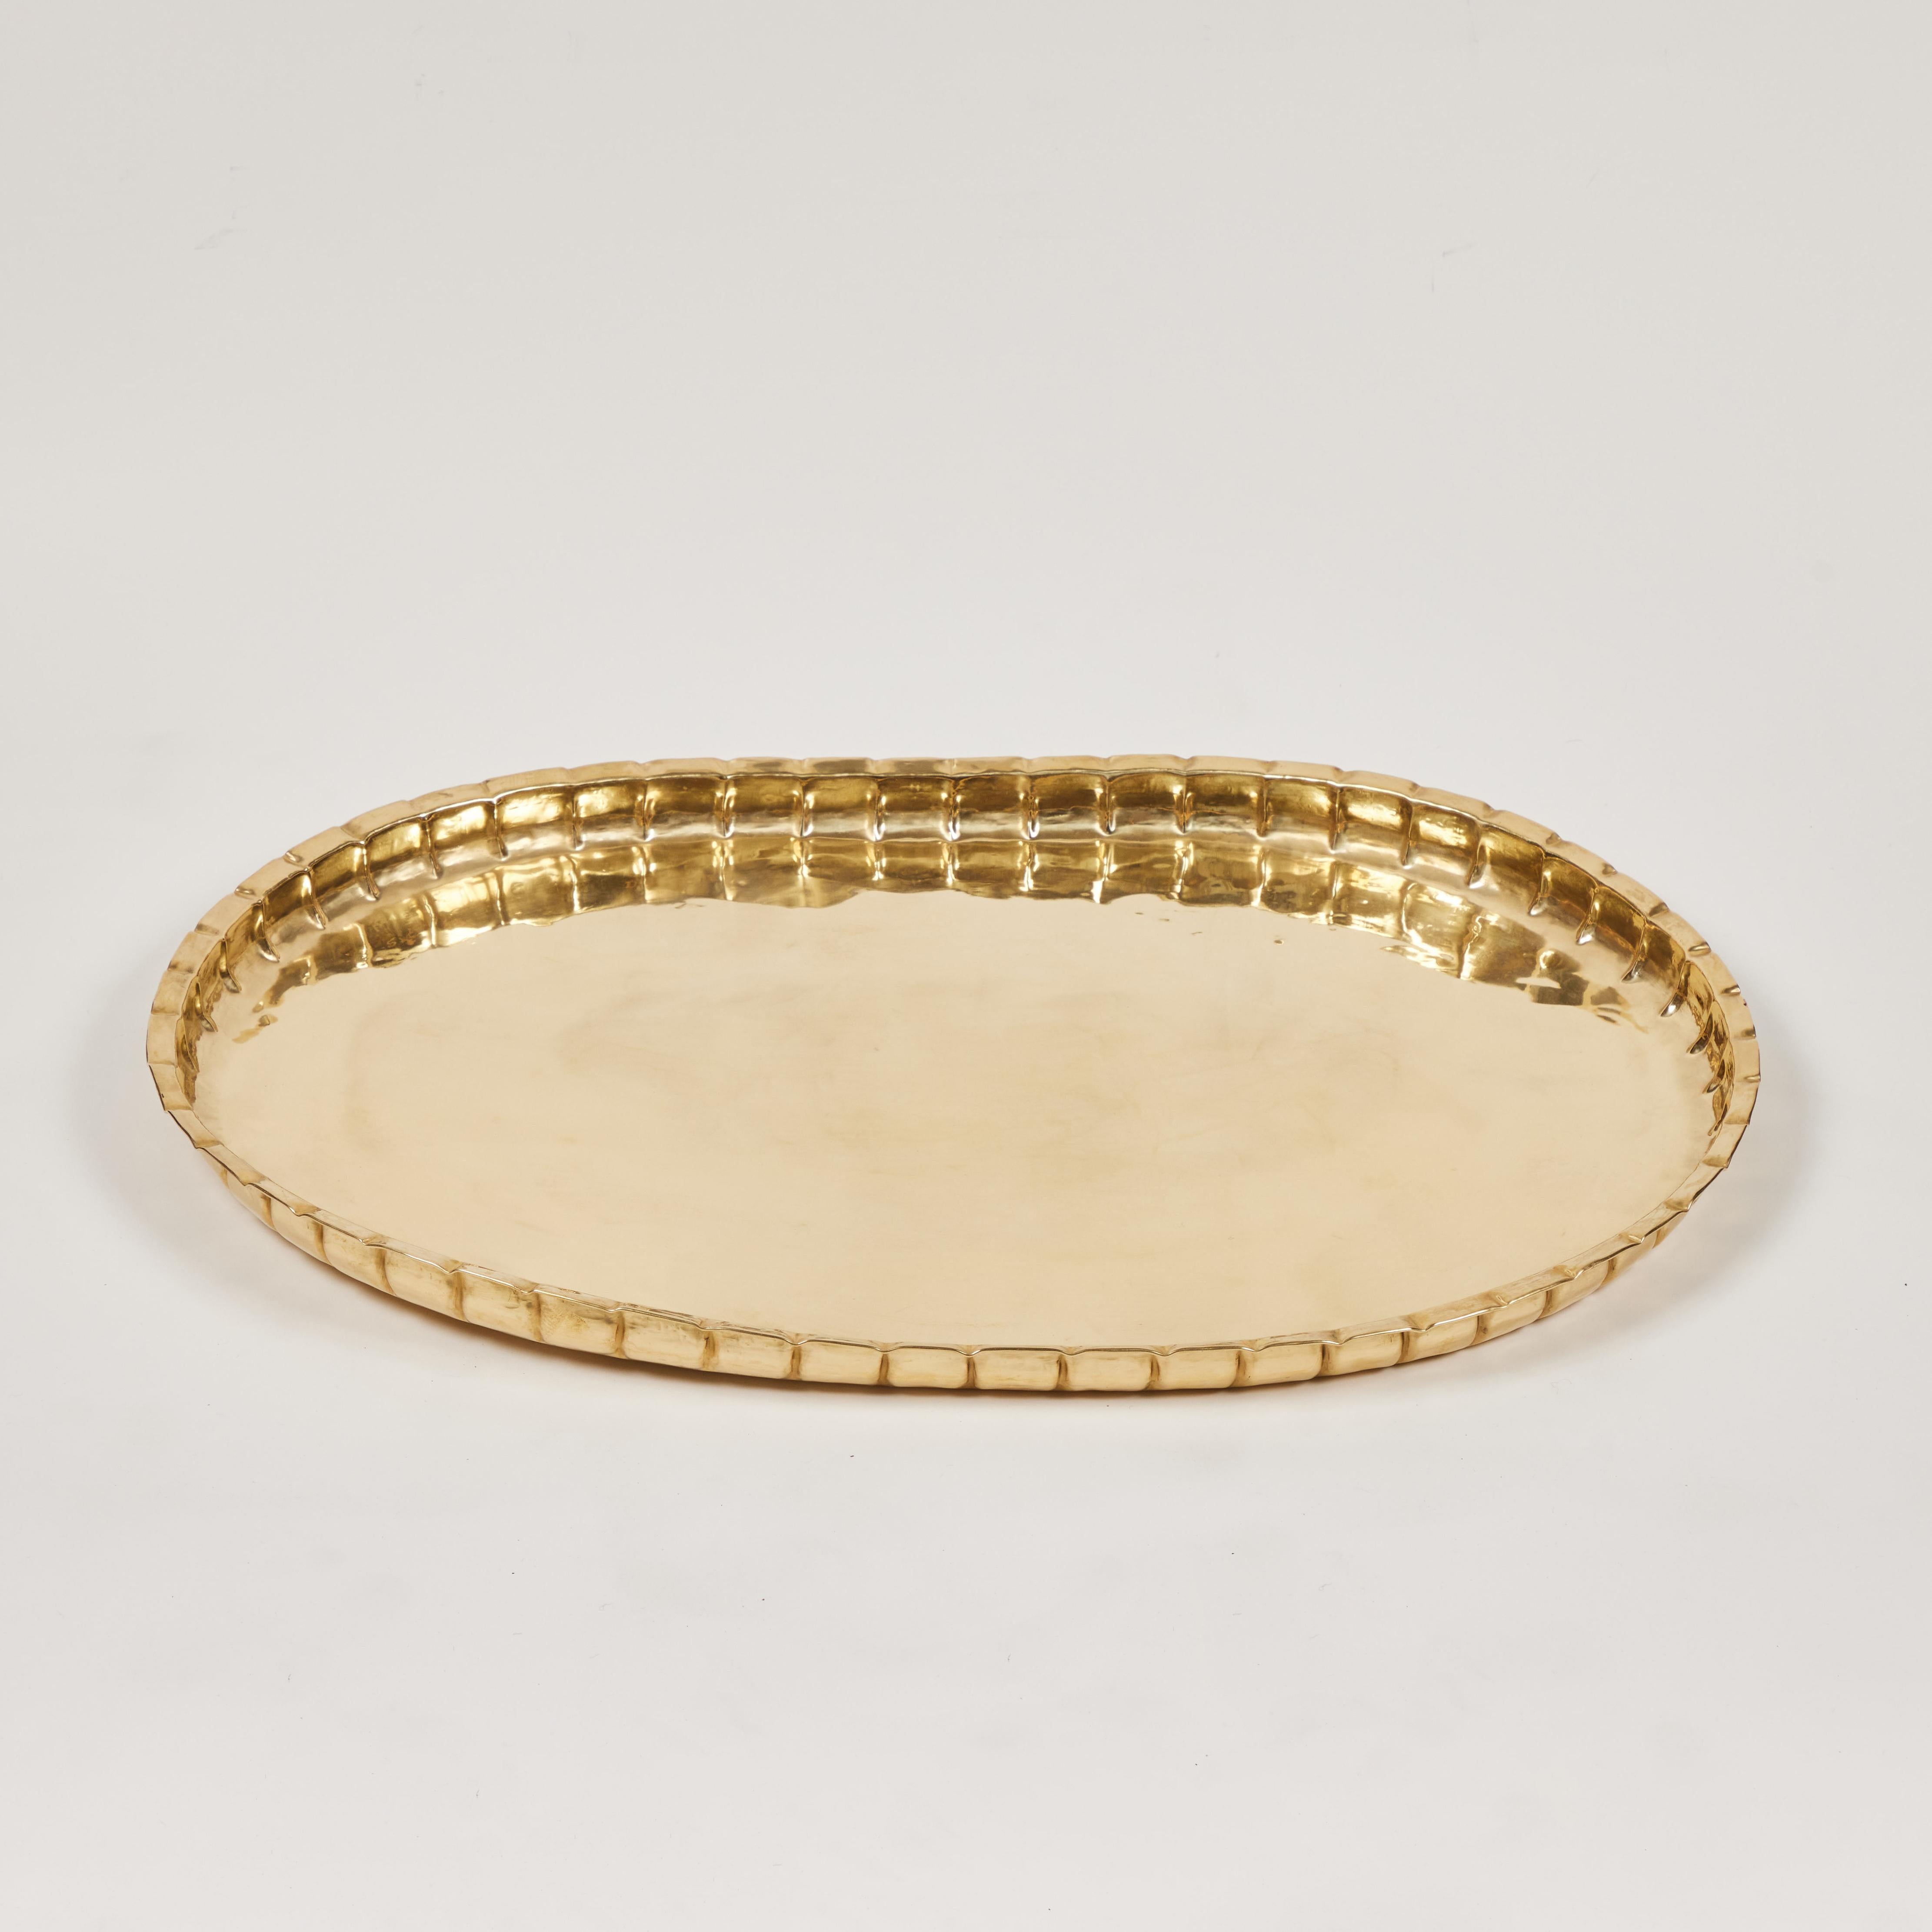 This fantastic large vintage handmade oval brass tray is the perfect addition for a table or ottoman. It is accented with a decorative 'pie crust' crimped edge surround and has been newly polished. 

It measures 28